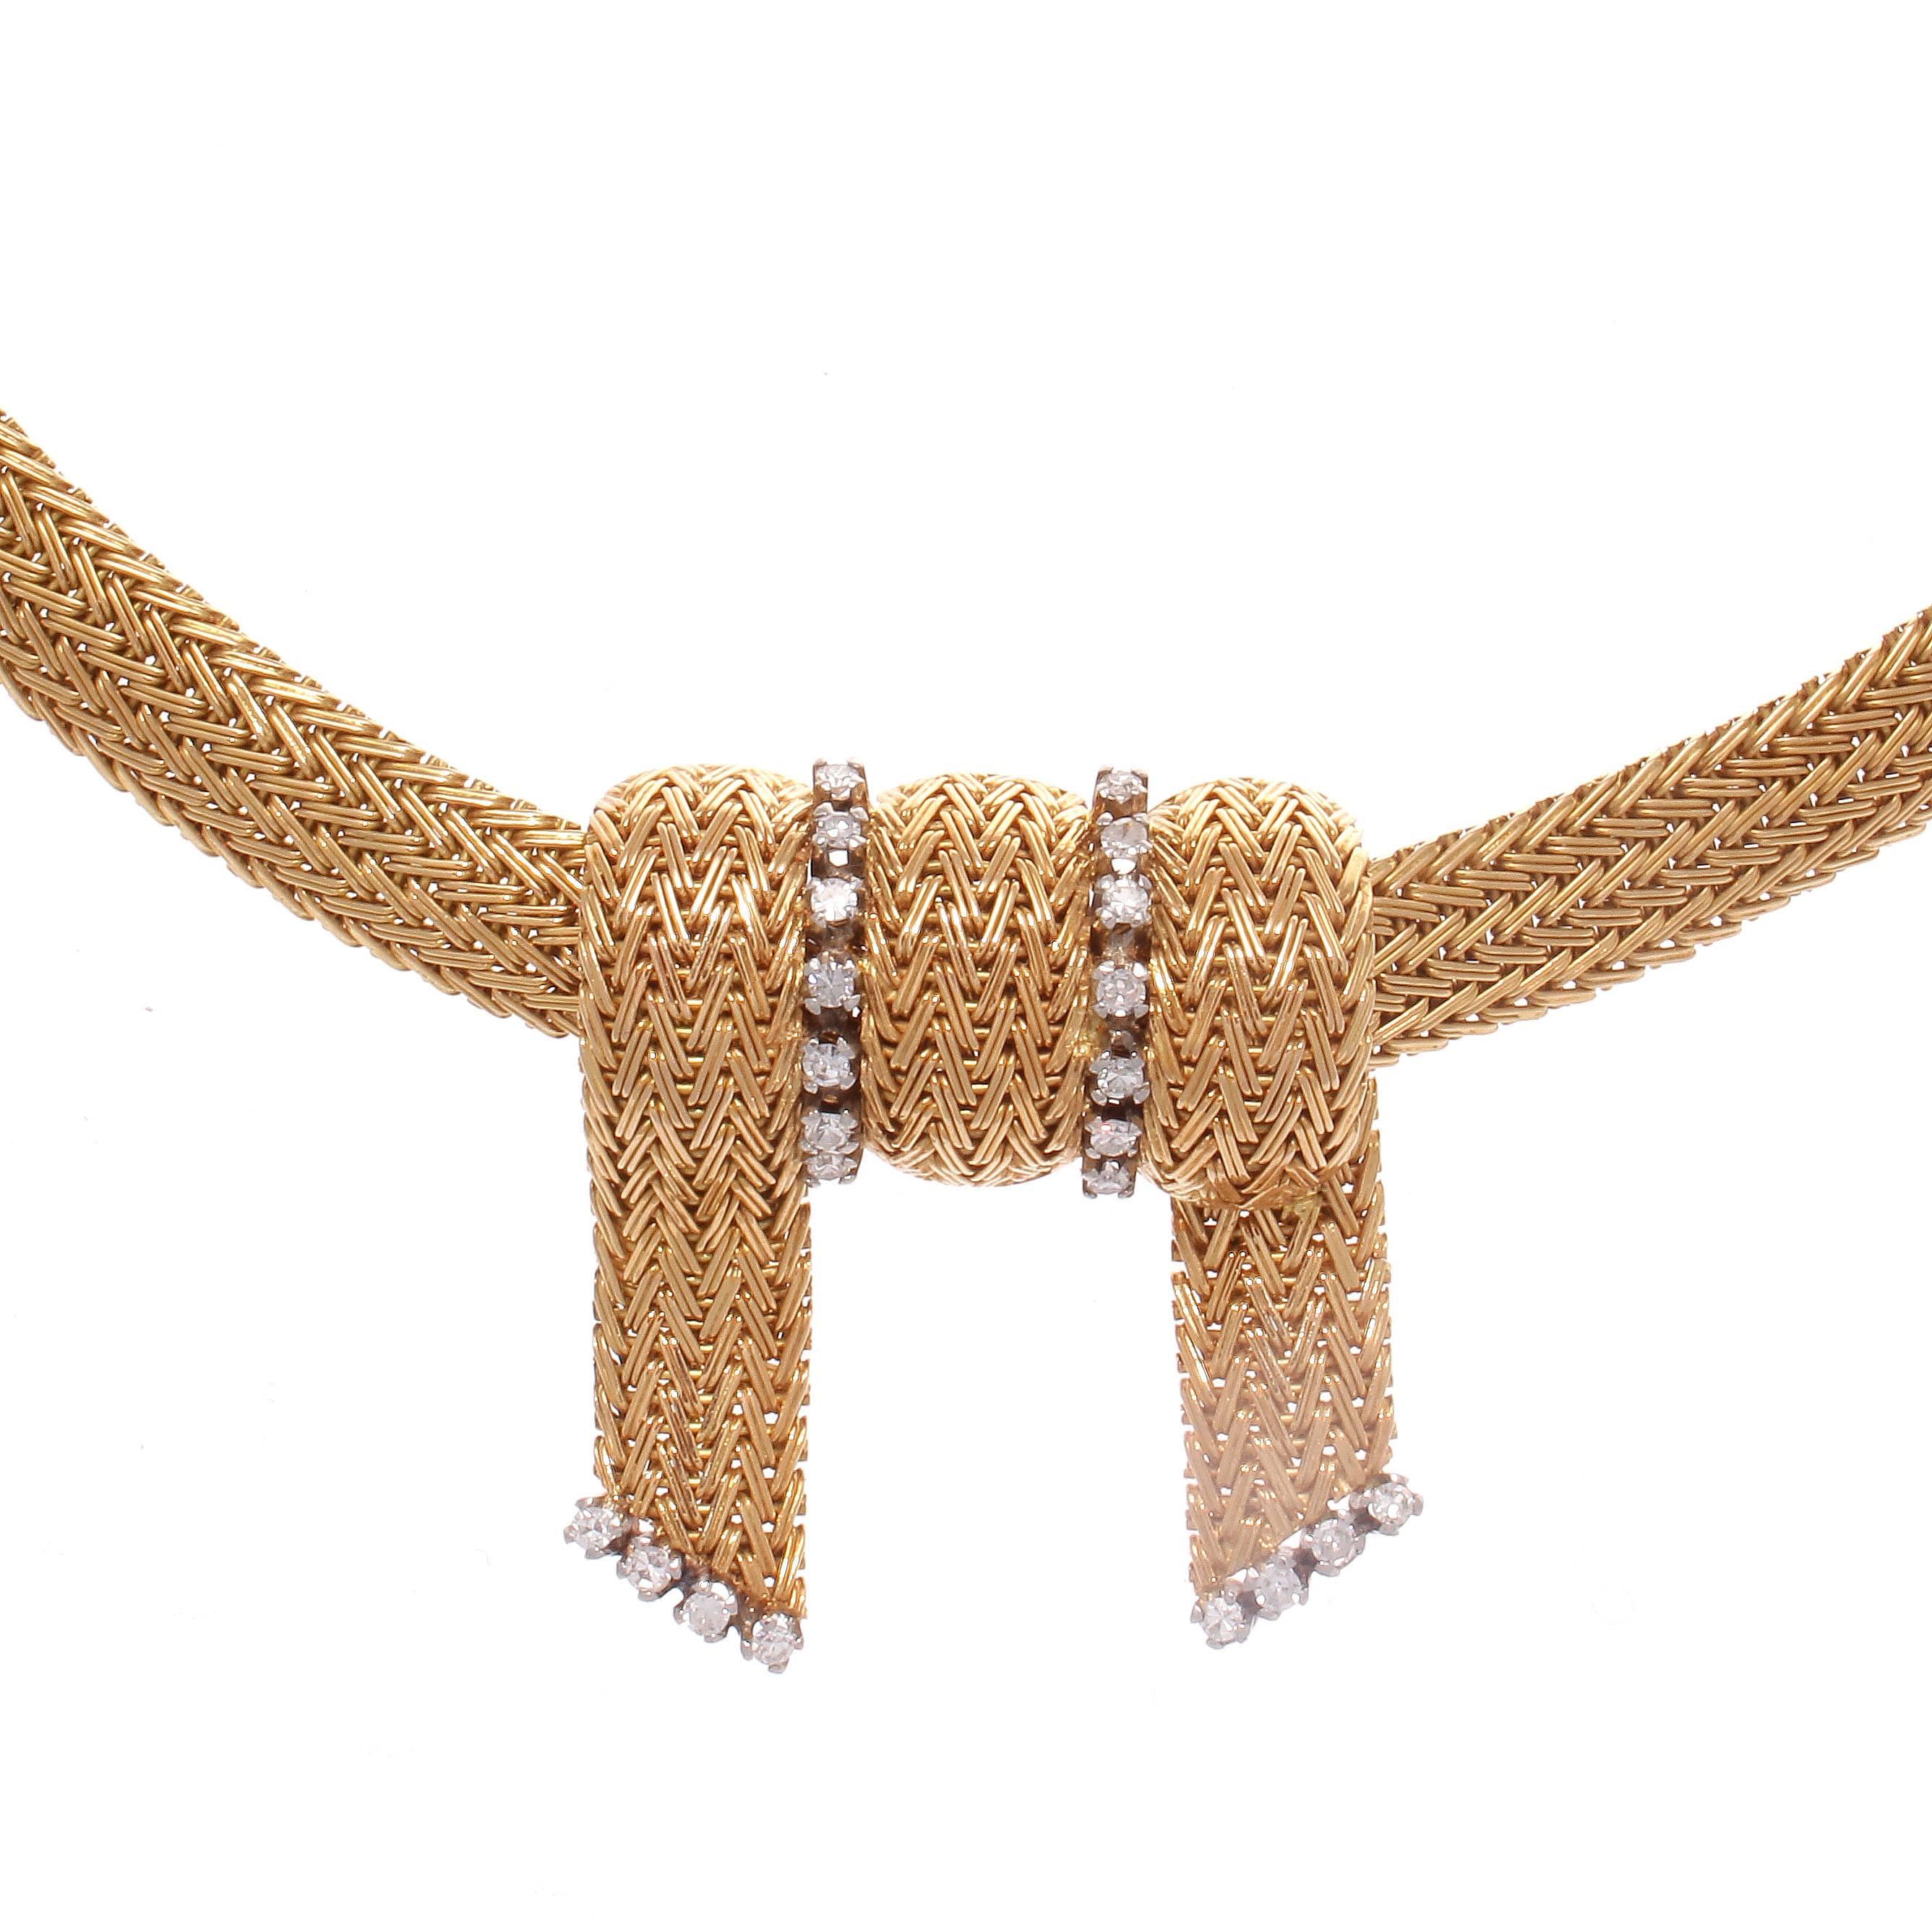 From South America where fine jewelry was manufactured in the 1950's and sought after by the lucky few who traveled there. This late retro necklace has intricately fashioned braided gold links  of glistening 18k yellow gold.  Featuring a freely